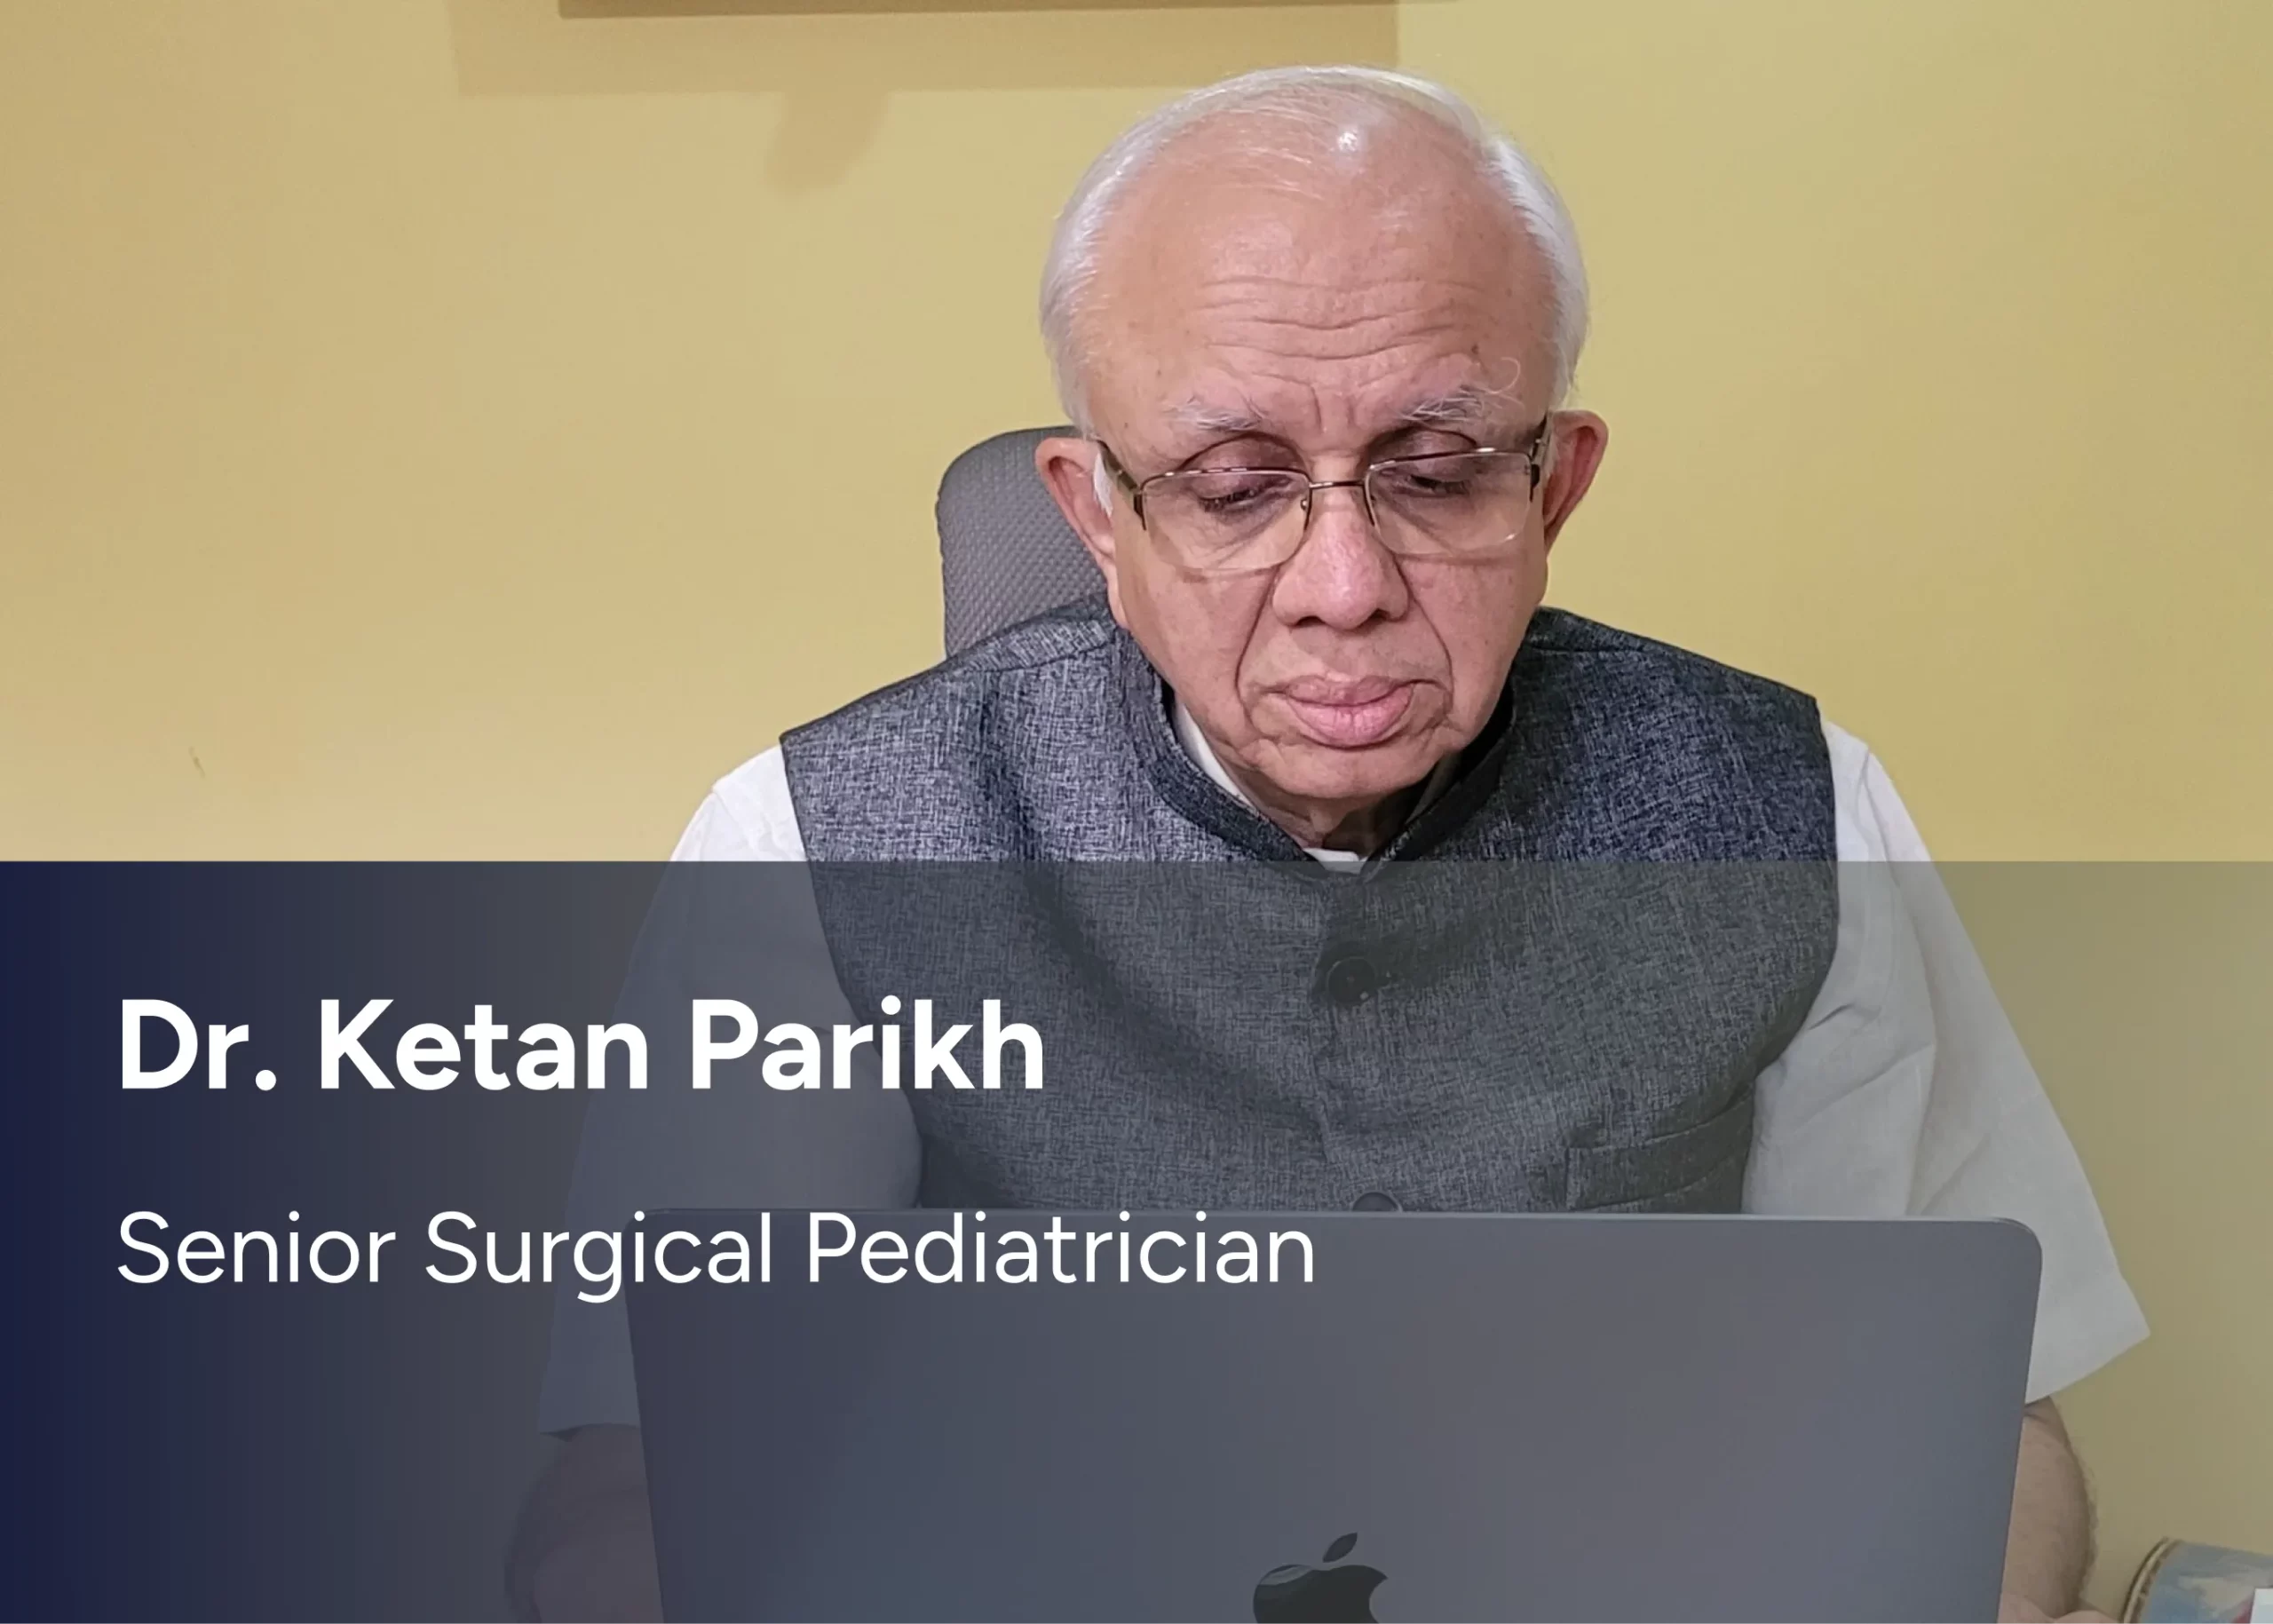 Image: Dr. Ketan Parikh: Revolutionizing Rural Healthcare with Rational, Optimised, Accessible Facilities